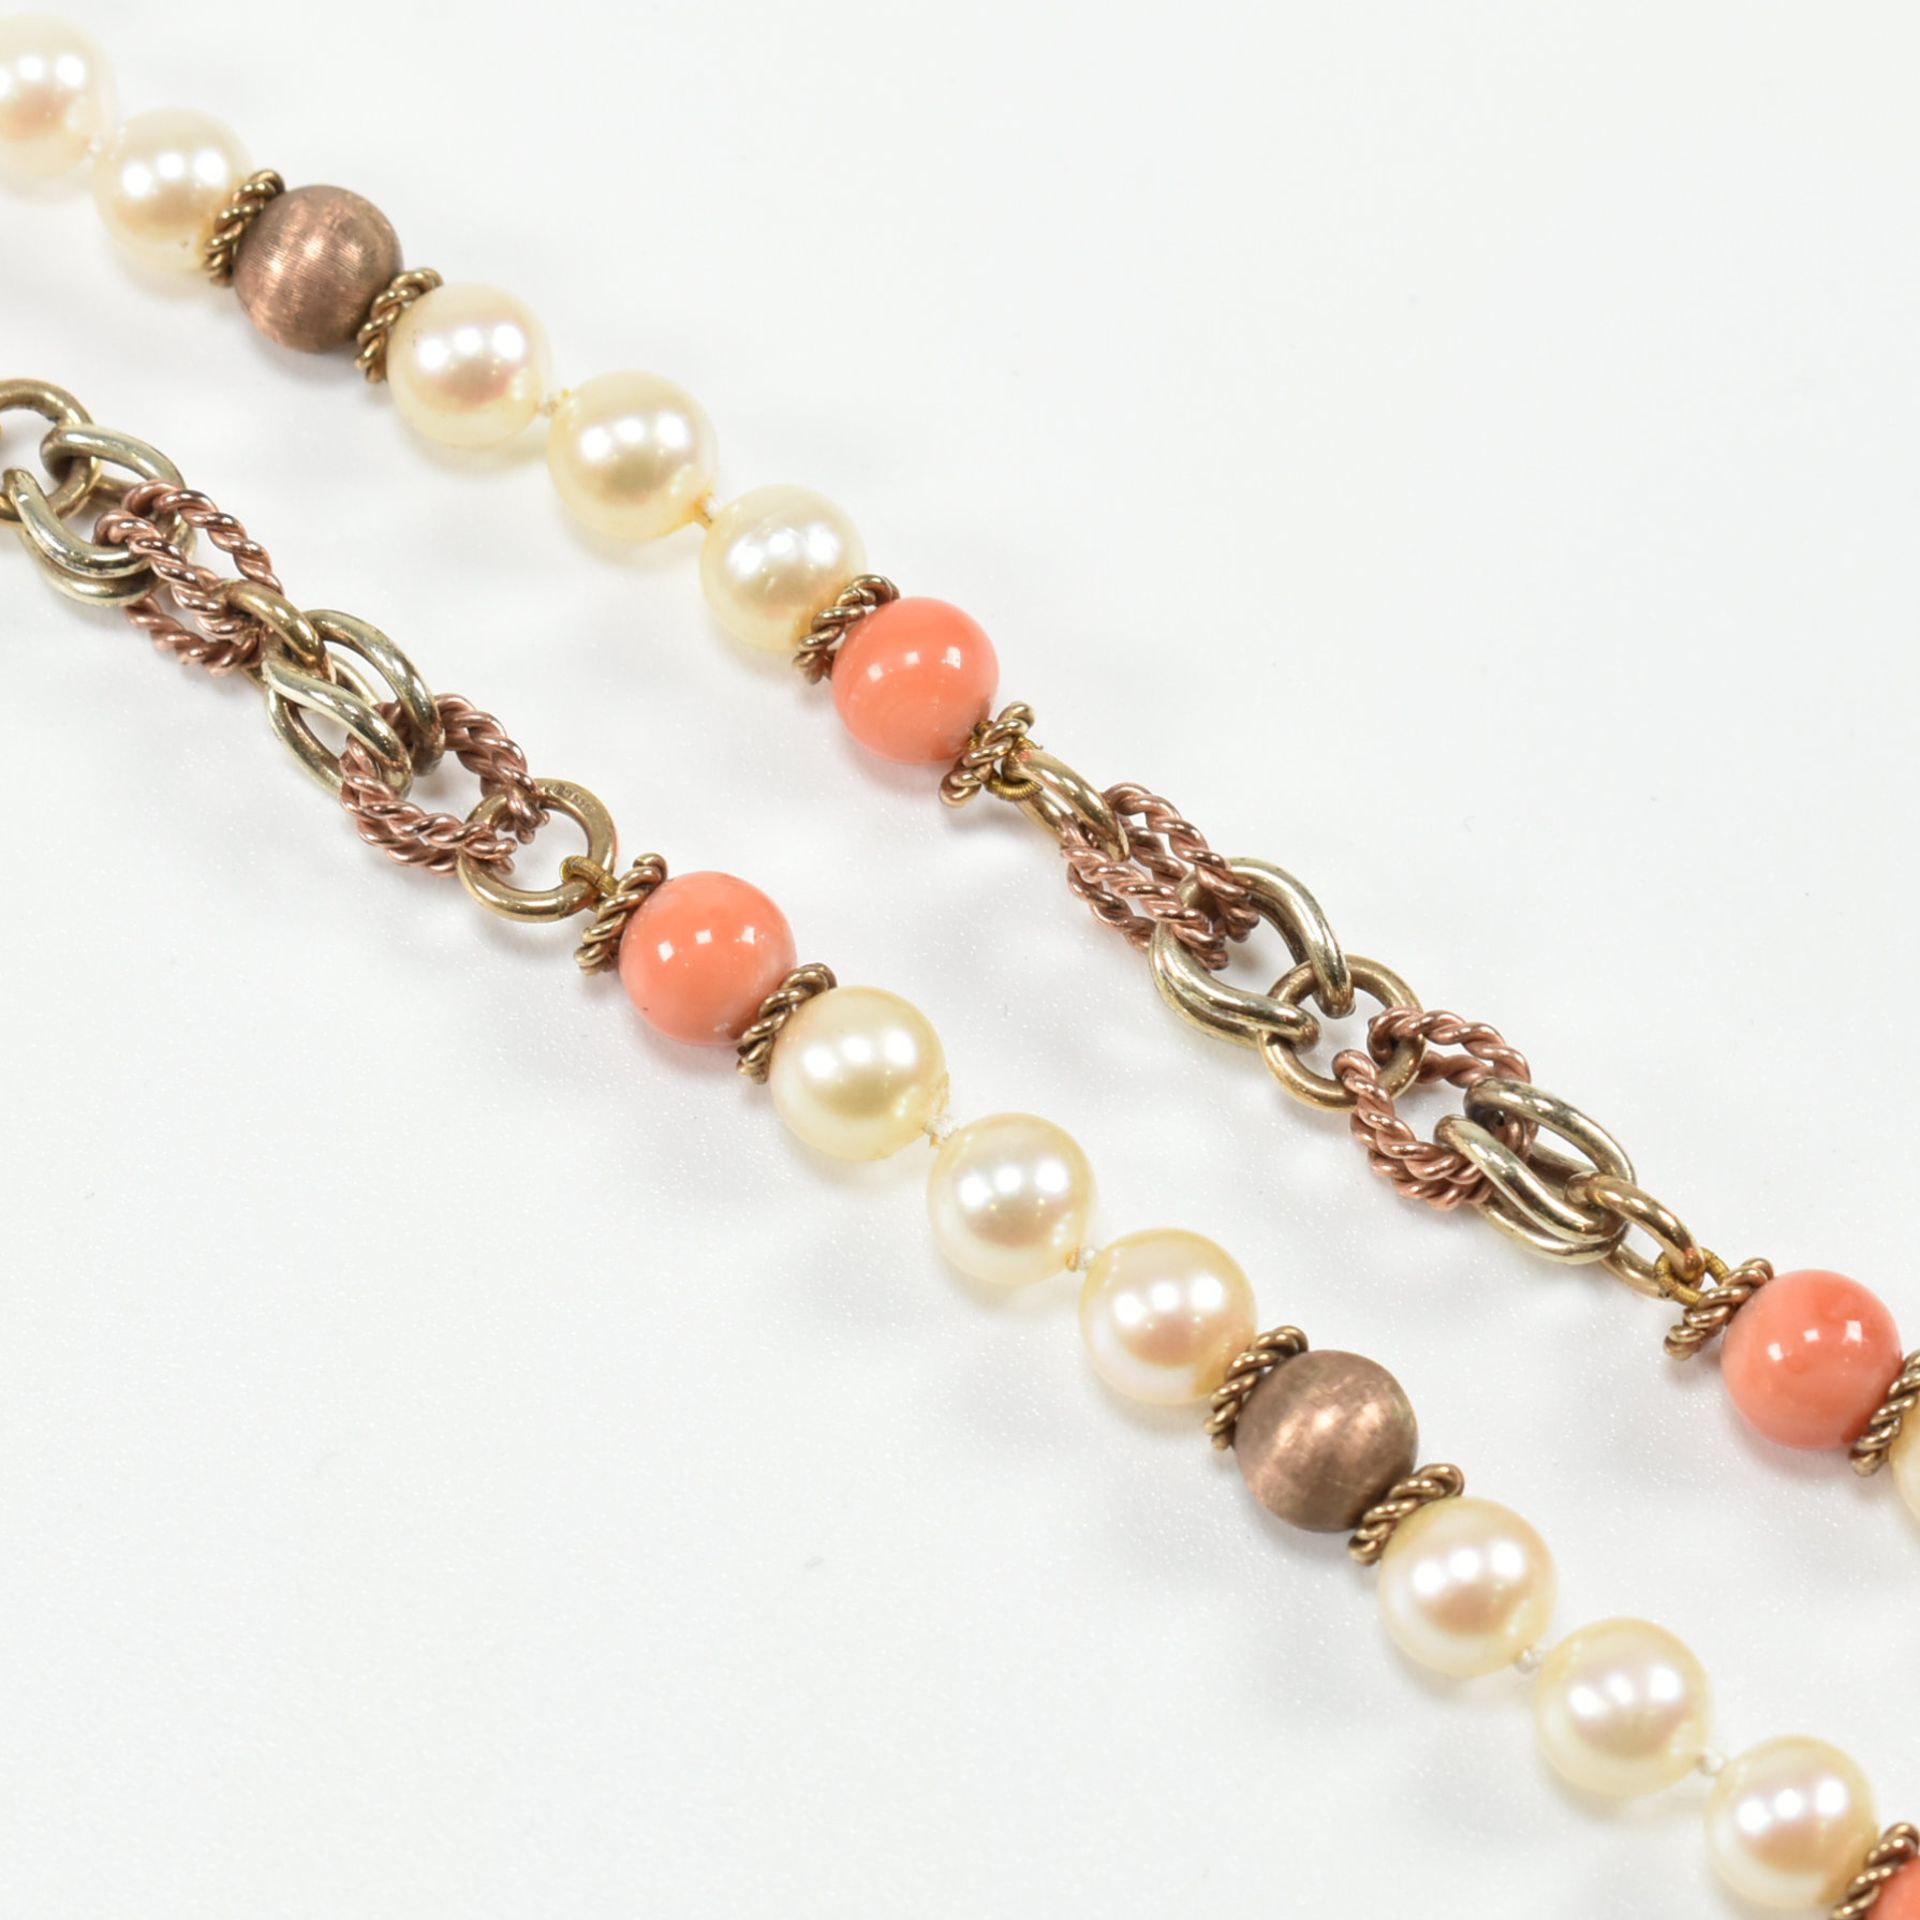 VINTAGE HALLMARKED 9CT TRICOLOUR GOLD PEARL & CORAL NECKLACE - Image 2 of 4